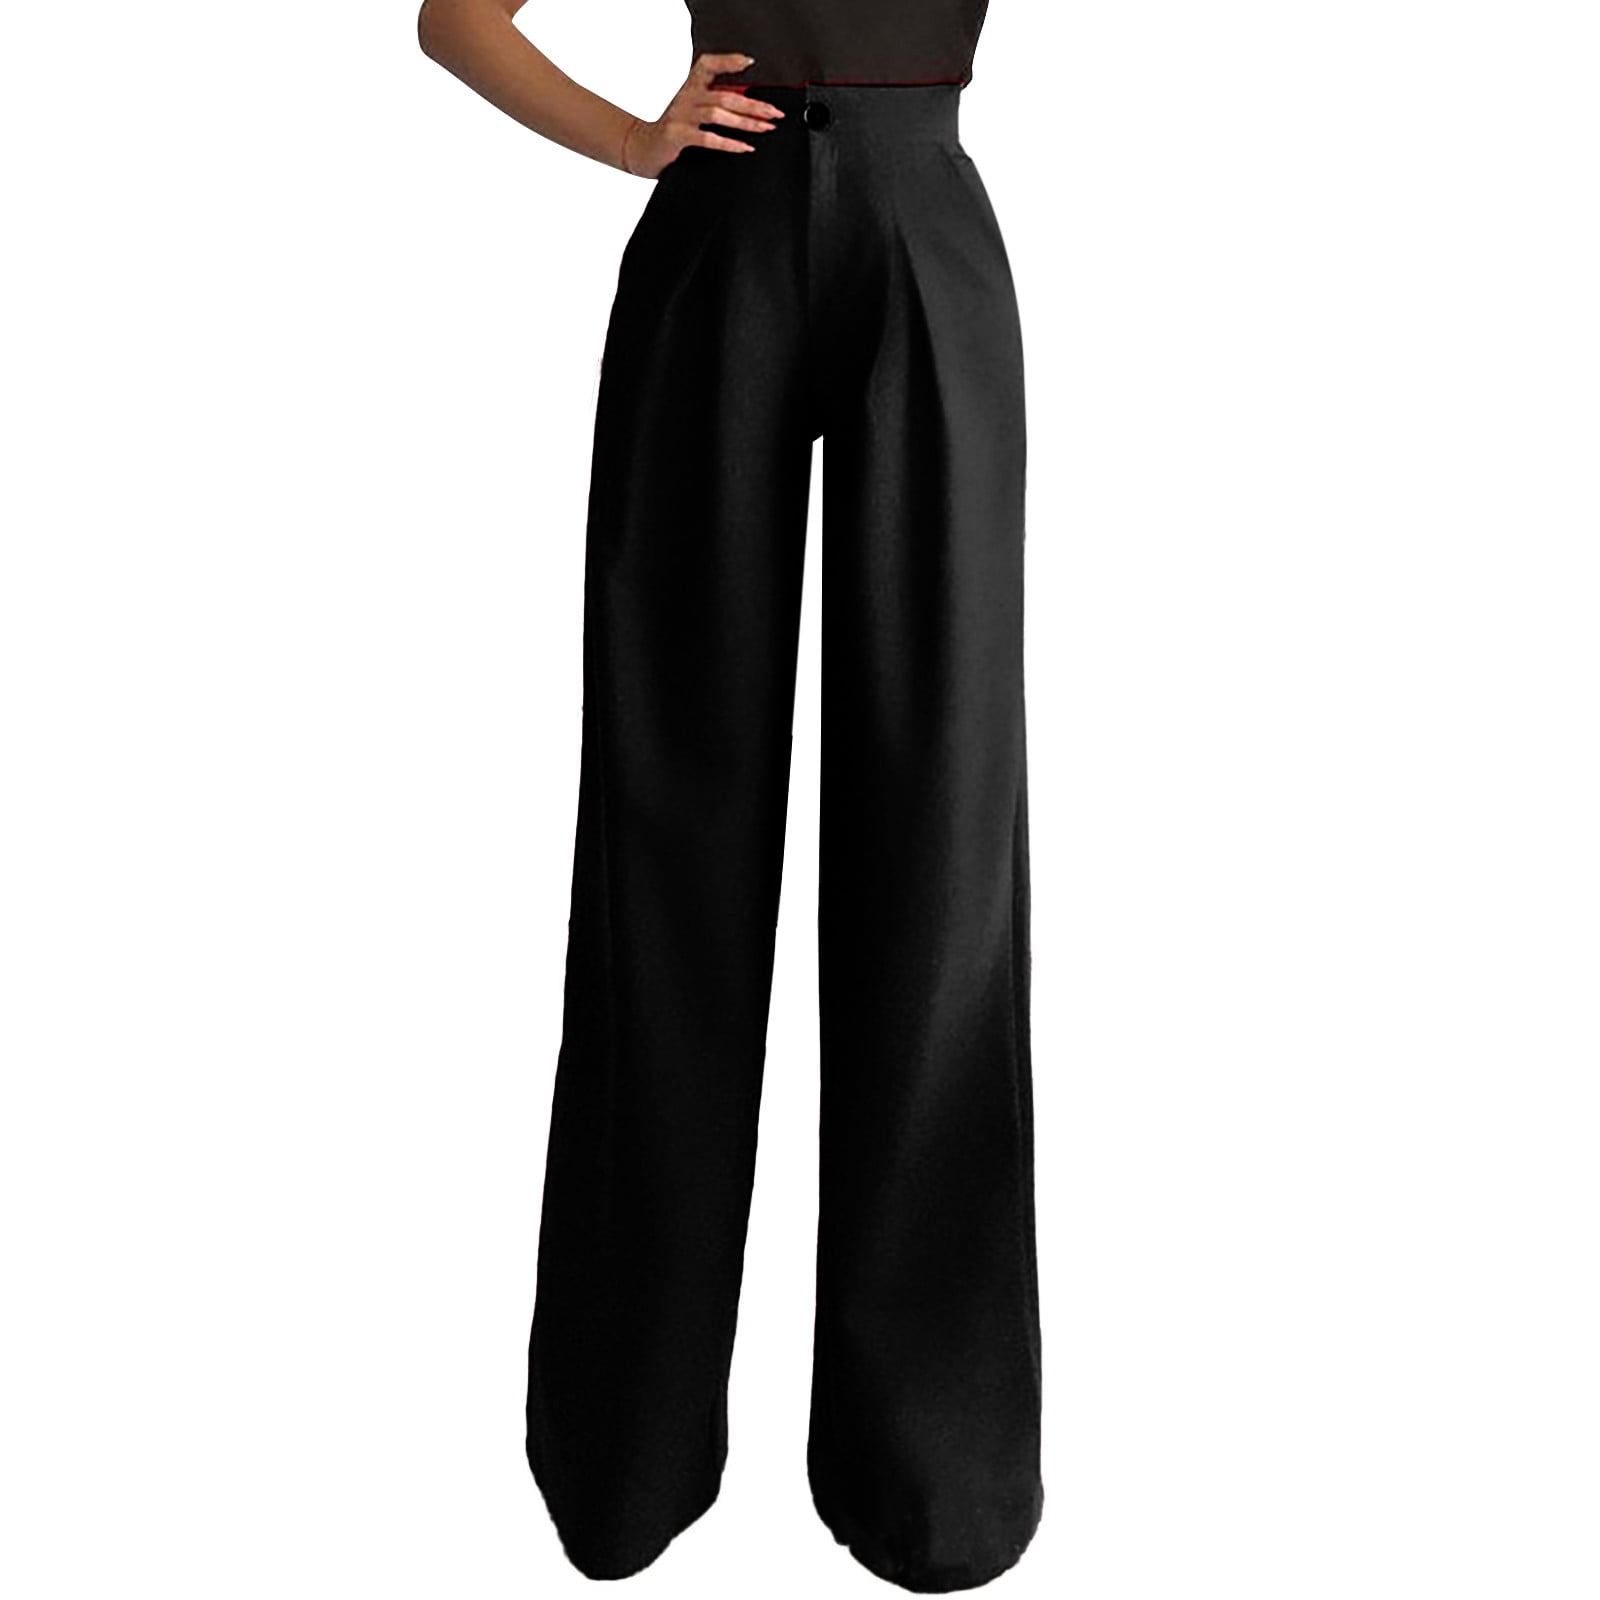 HSMQHJWE Black Satin Pants Pants Suits For Women Business Casual Pants  Trousers Flared Straight-Leg Long Pockets Women High Solid Waist Pants  Pants Express Pants For Women Slim Fit 